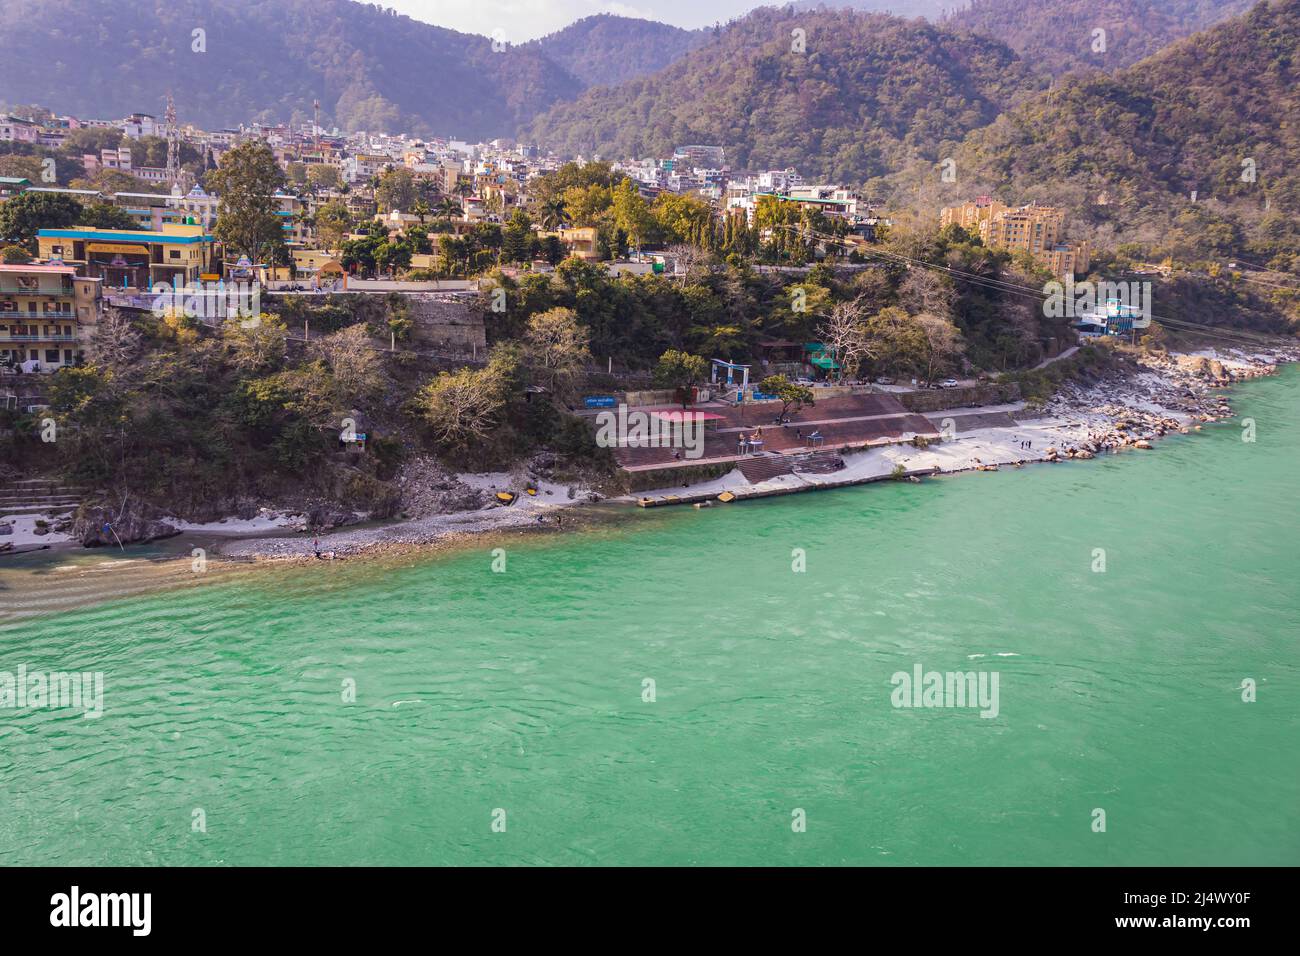 ganges river flowing through mountains with city nestled at riverbank from top angle image is taken at rishikesh uttrakhand india on Mar 15 2022. Stock Photo